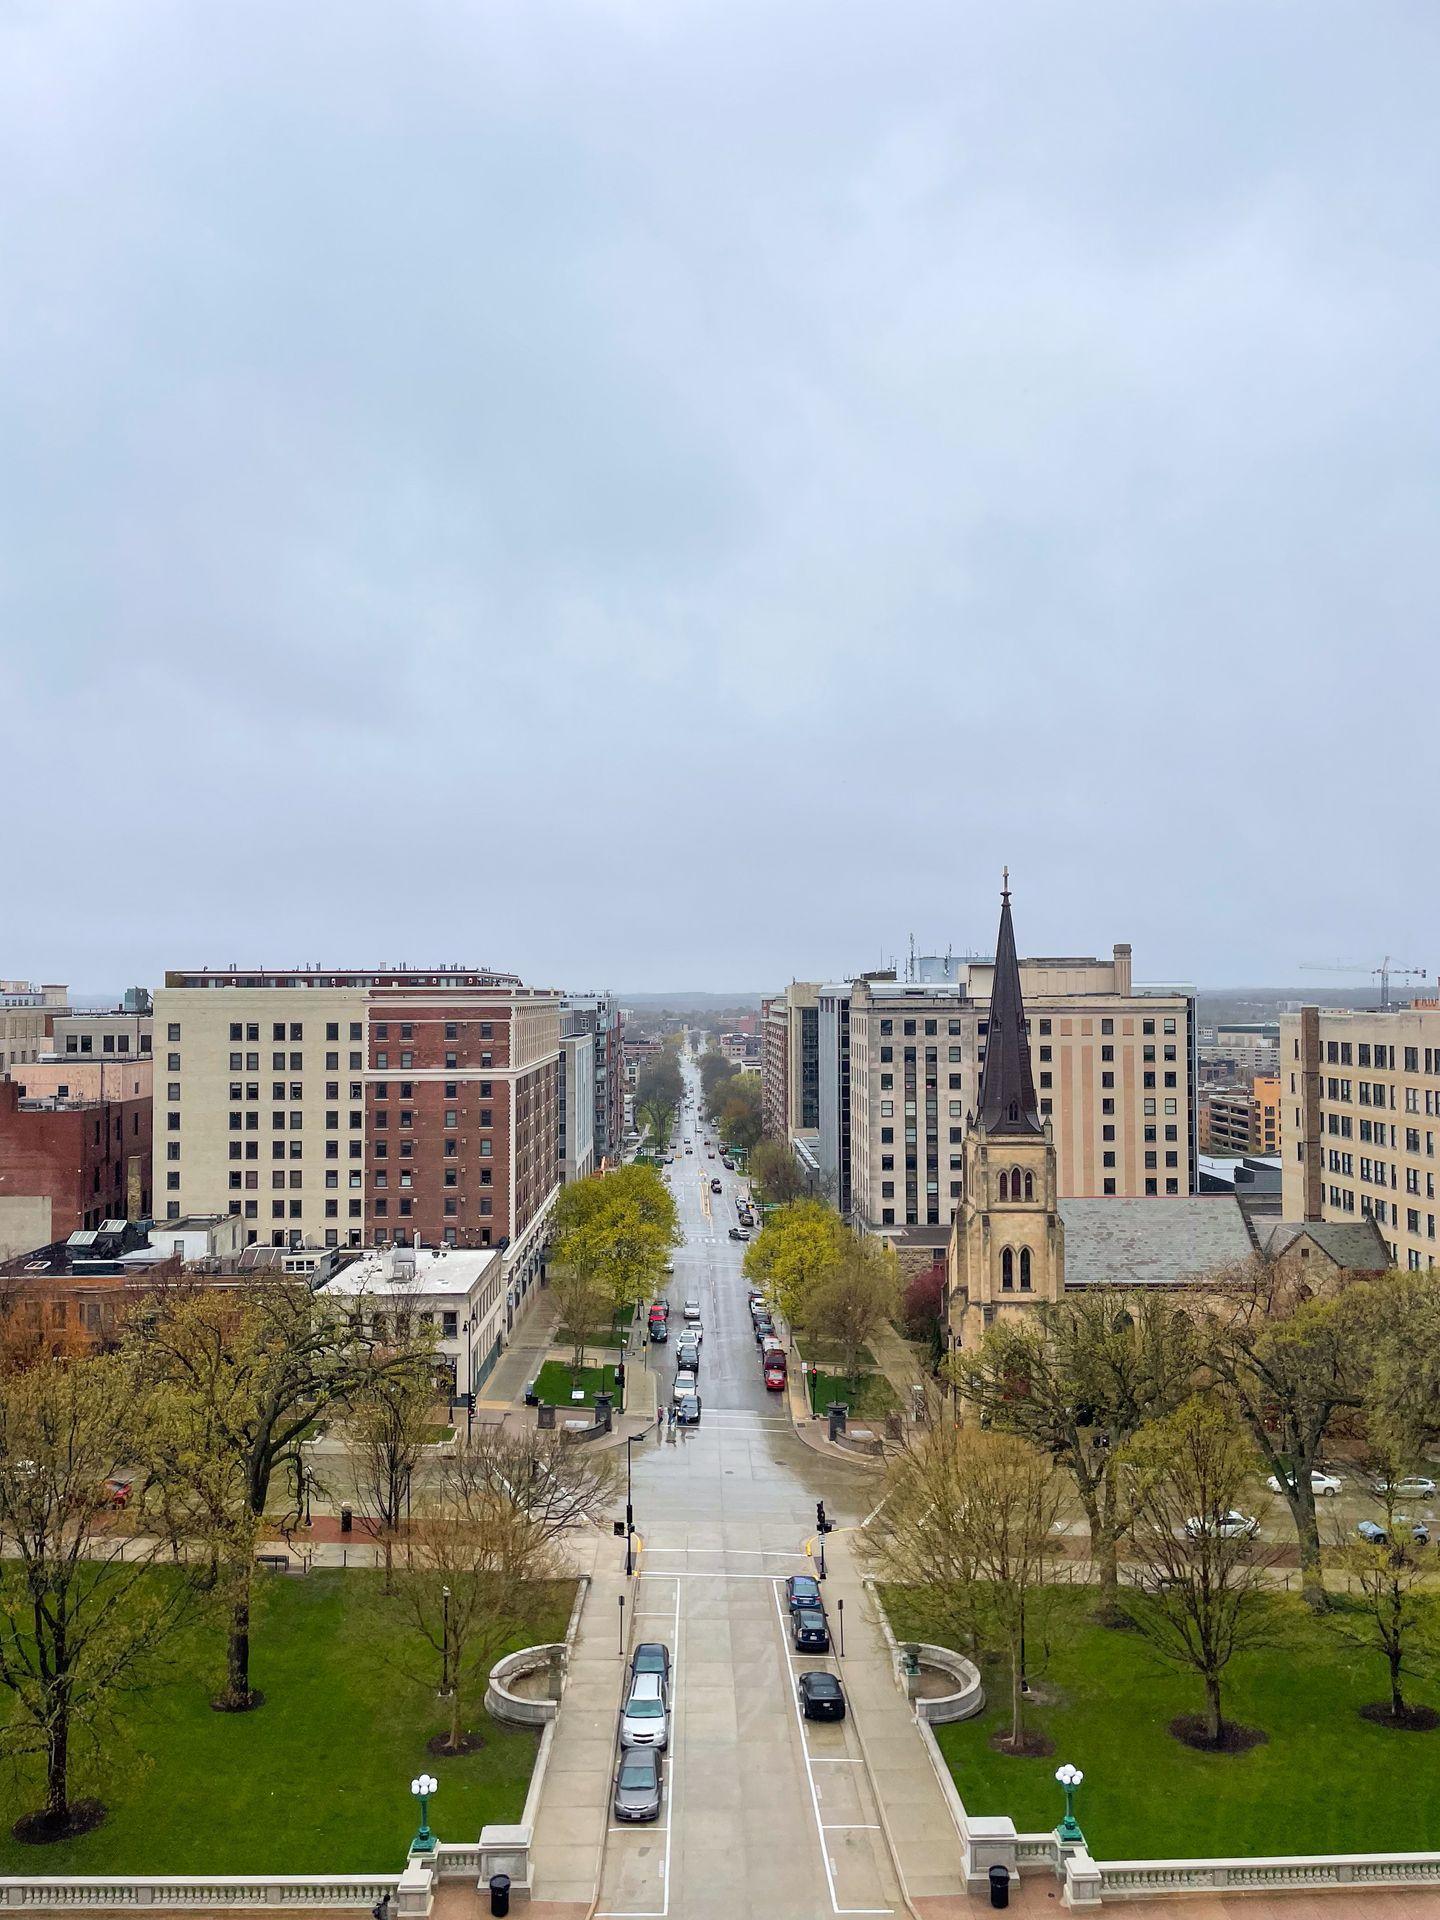 A view looking straight down a street in downtown Madison from the state capitol observation deck.